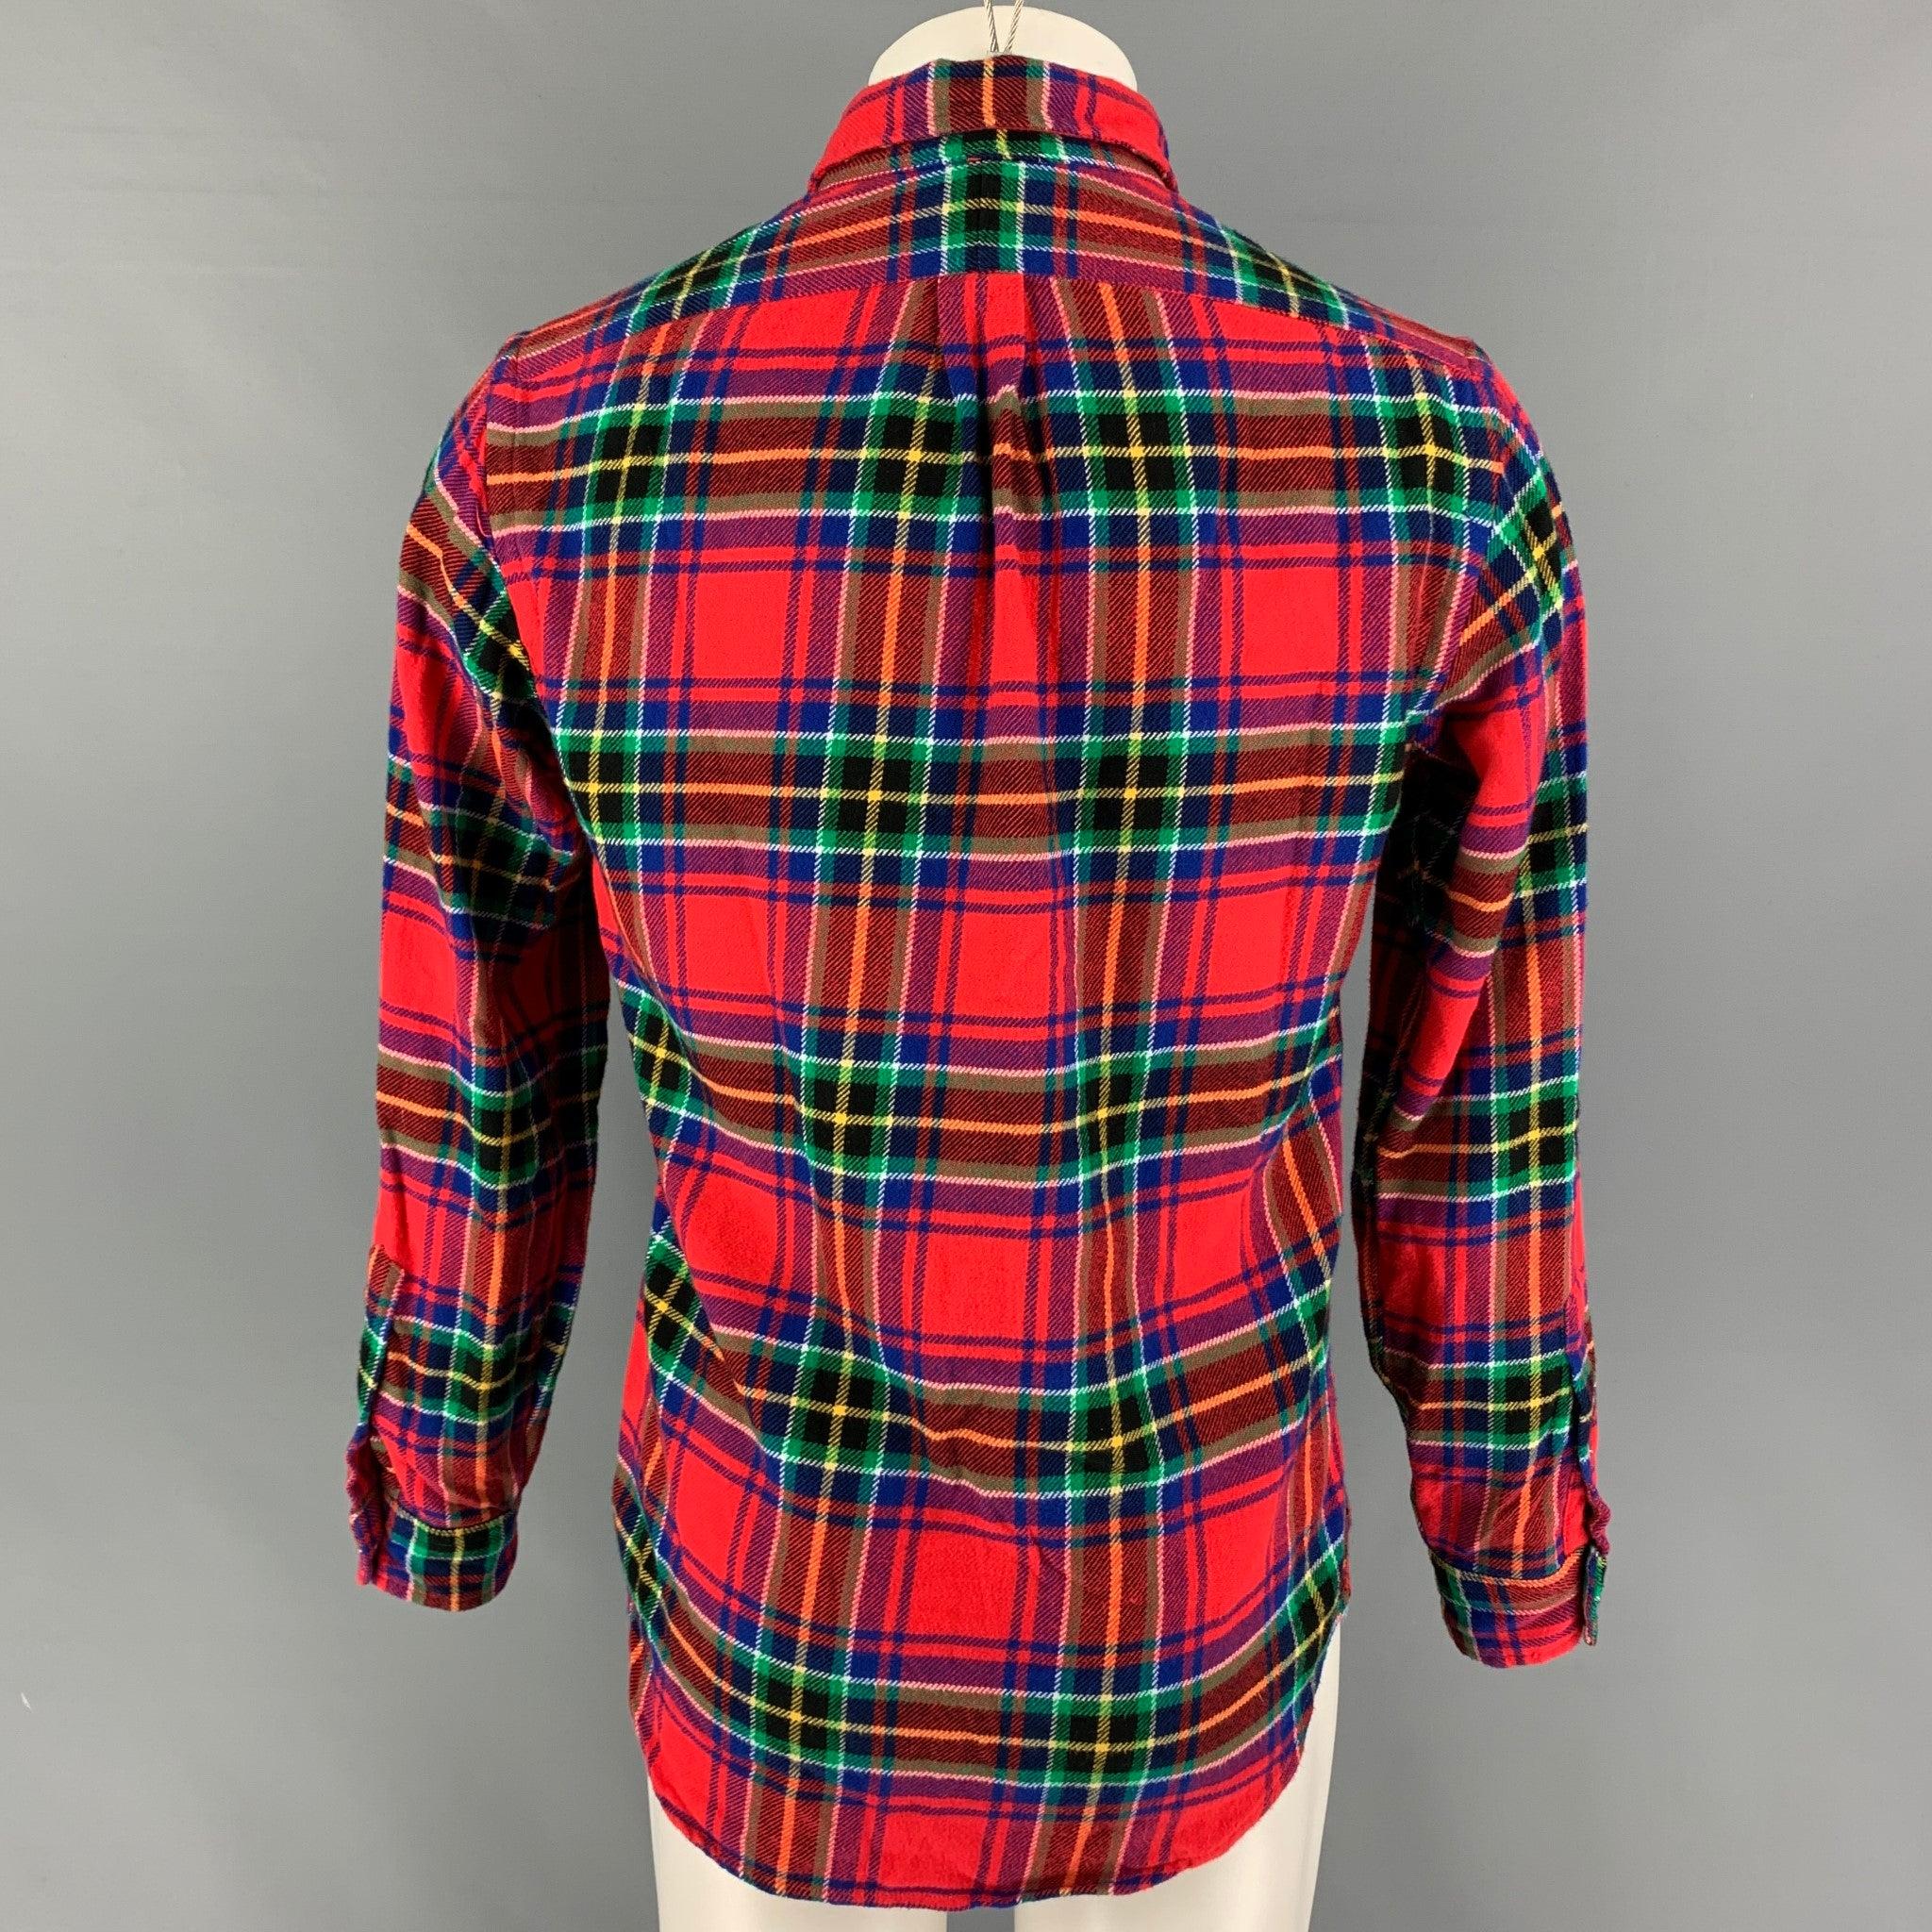 RALPH LAUREN Size S Multi-Color Plaid Cotton Button Up Long Sleeve Shirt In Good Condition For Sale In San Francisco, CA